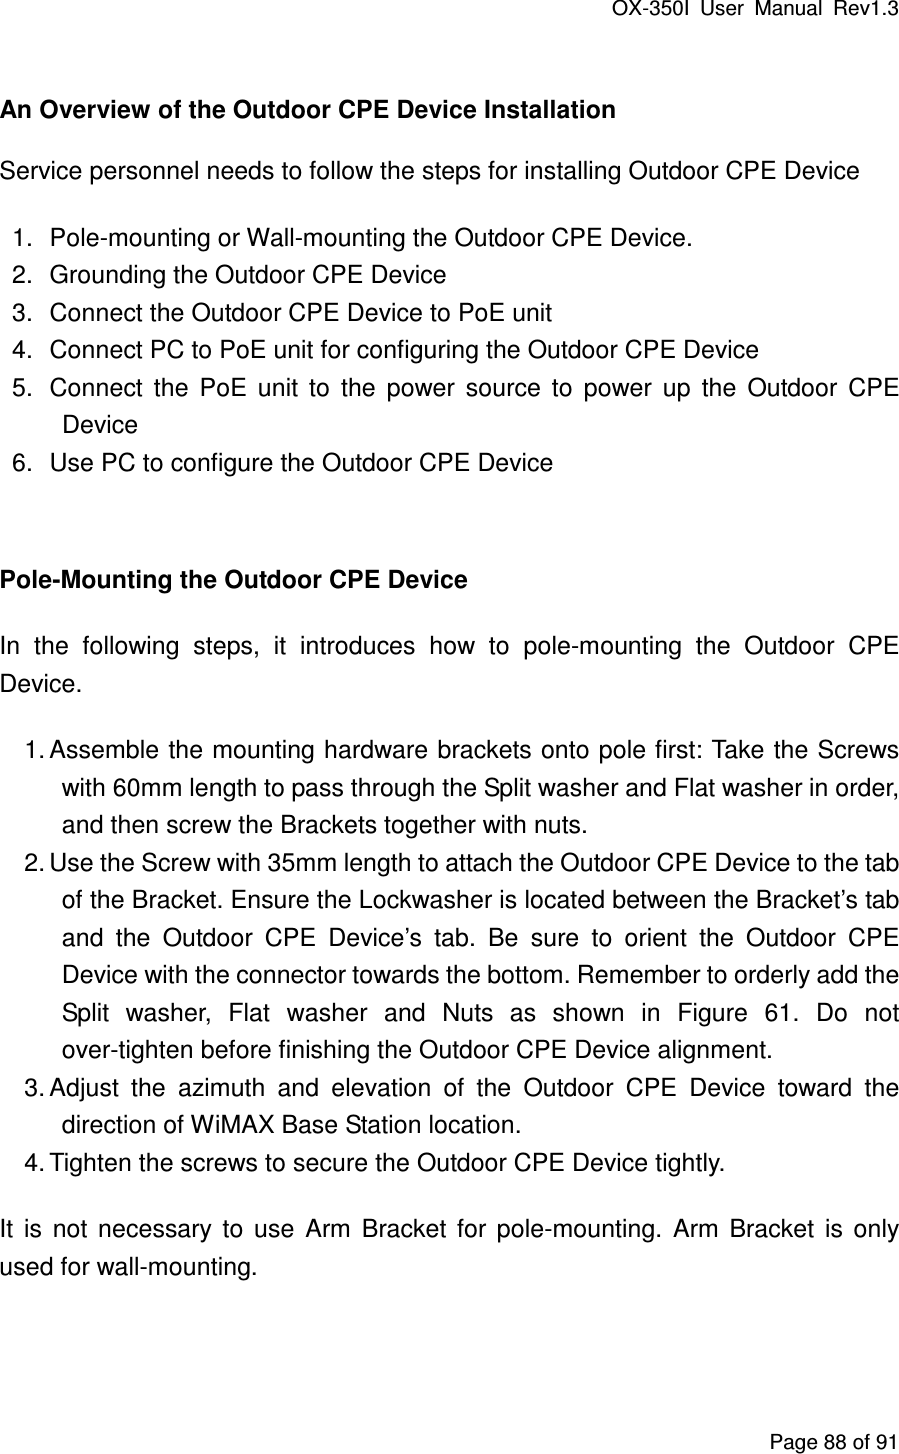 OX-350I  User  Manual  Rev1.3 Page 88 of 91  An Overview of the Outdoor CPE Device Installation Service personnel needs to follow the steps for installing Outdoor CPE Device   1.  Pole-mounting or Wall-mounting the Outdoor CPE Device.   2.  Grounding the Outdoor CPE Device 3.  Connect the Outdoor CPE Device to PoE unit 4.  Connect PC to PoE unit for configuring the Outdoor CPE Device 5.  Connect  the  PoE  unit  to  the  power  source  to  power  up  the  Outdoor  CPE Device 6.  Use PC to configure the Outdoor CPE Device  Pole-Mounting the Outdoor CPE Device In  the  following  steps,  it  introduces  how  to  pole-mounting  the  Outdoor  CPE Device. 1. Assemble the mounting hardware brackets onto pole first: Take the Screws with 60mm length to pass through the Split washer and Flat washer in order, and then screw the Brackets together with nuts. 2. Use the Screw with 35mm length to attach the Outdoor CPE Device to the tab of the Bracket. Ensure the Lockwasher is located between the Bracket’s tab and  the  Outdoor  CPE  Device’s  tab.  Be  sure  to  orient  the  Outdoor  CPE Device with the connector towards the bottom. Remember to orderly add the Split  washer,  Flat  washer  and  Nuts  as  shown  in  Figure  61.  Do  not over-tighten before finishing the Outdoor CPE Device alignment. 3. Adjust  the  azimuth  and  elevation  of  the  Outdoor  CPE  Device  toward  the direction of WiMAX Base Station location. 4. Tighten the screws to secure the Outdoor CPE Device tightly. It  is  not  necessary  to  use  Arm  Bracket  for  pole-mounting.  Arm  Bracket  is  only used for wall-mounting.   